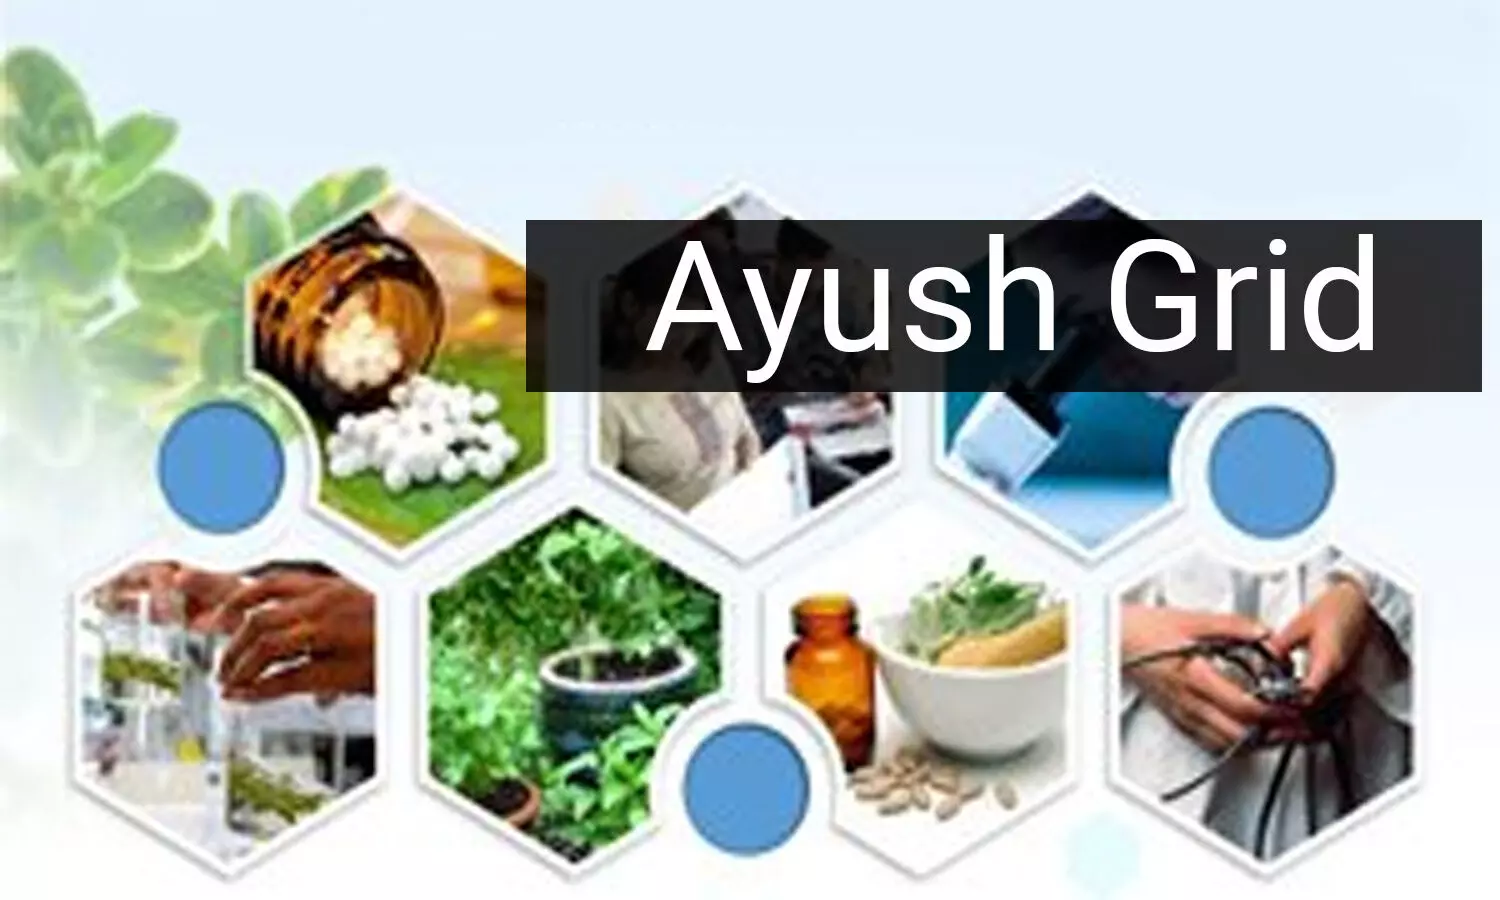 Nationwide AYUSH Grid connecting all hospitals and laboratories to promote traditional systems of medicines: Minister